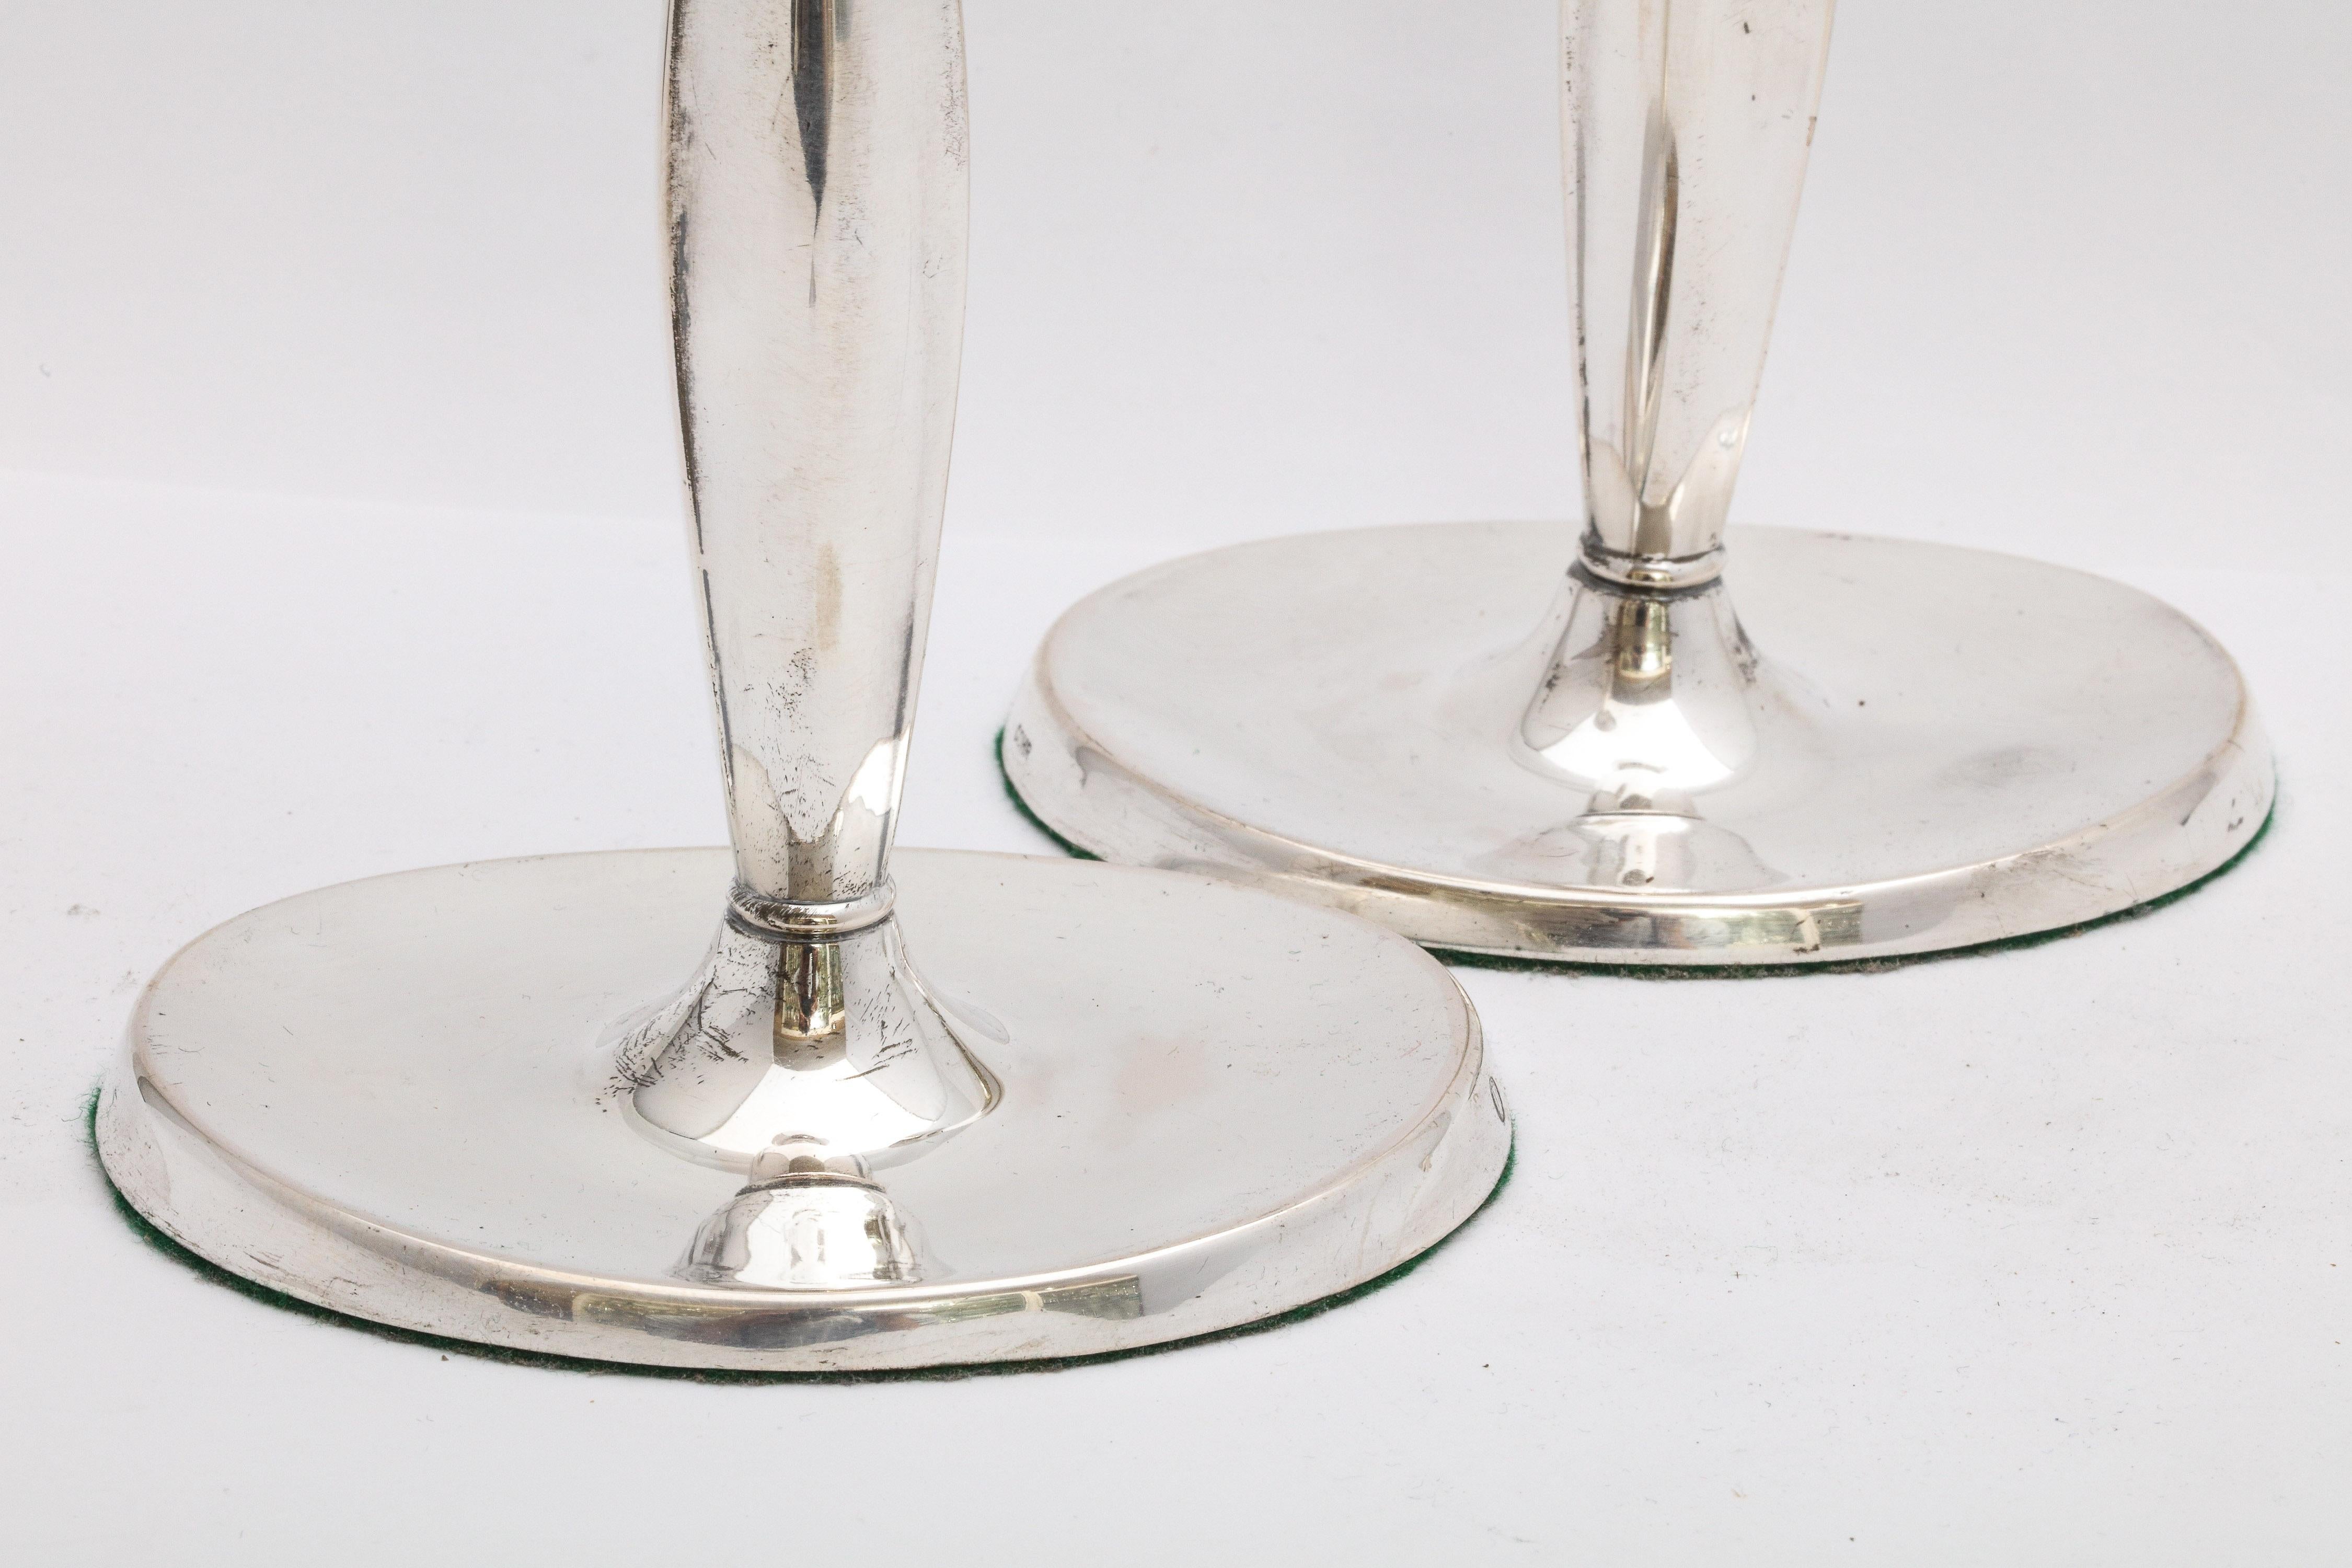 Pair of Mid-Century Modern Danish Sterling Silver Candlesticks by Cohr For Sale 2